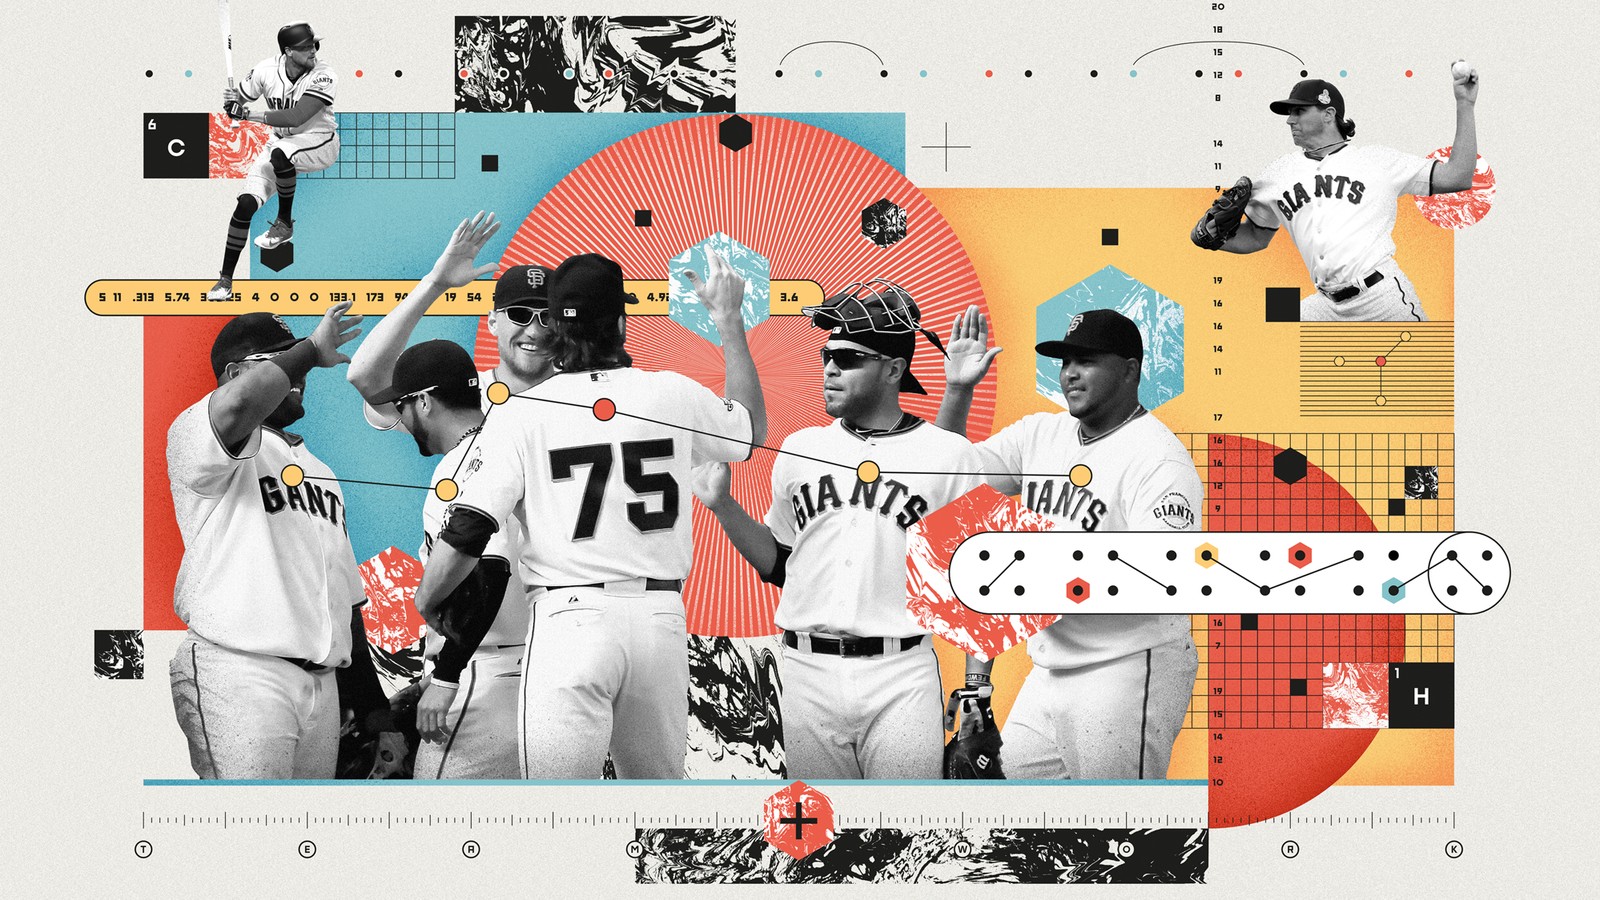 Baseball is changing its uniforms, but not its culture - The Washington Post